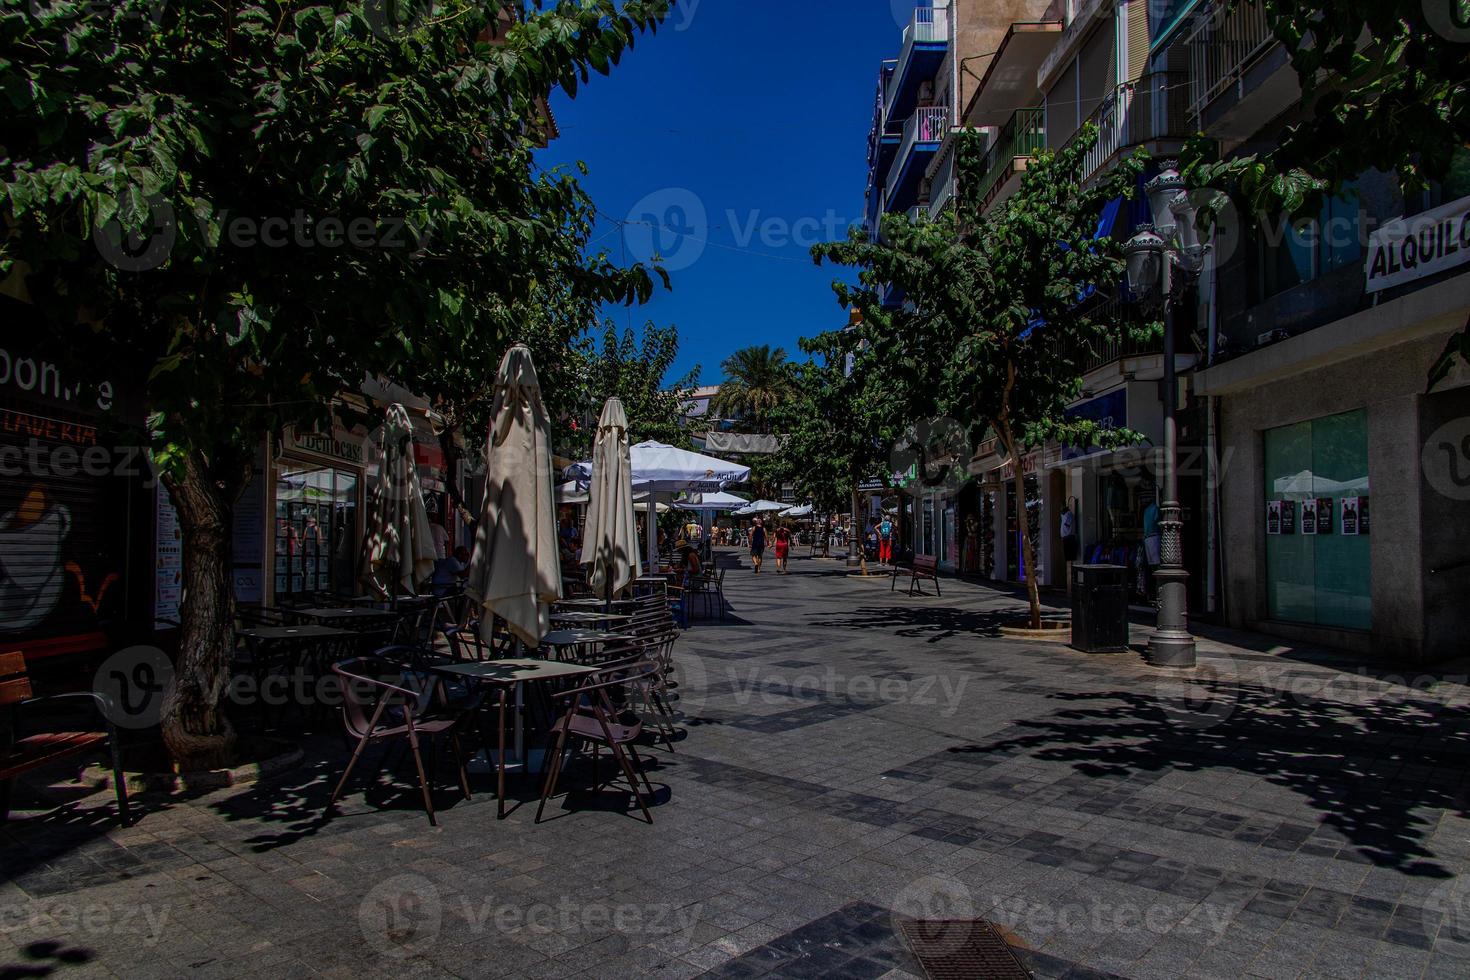 l urban landscape of a Spanish street in Benidorm with a cafe and tables on the sidewalk without people photo